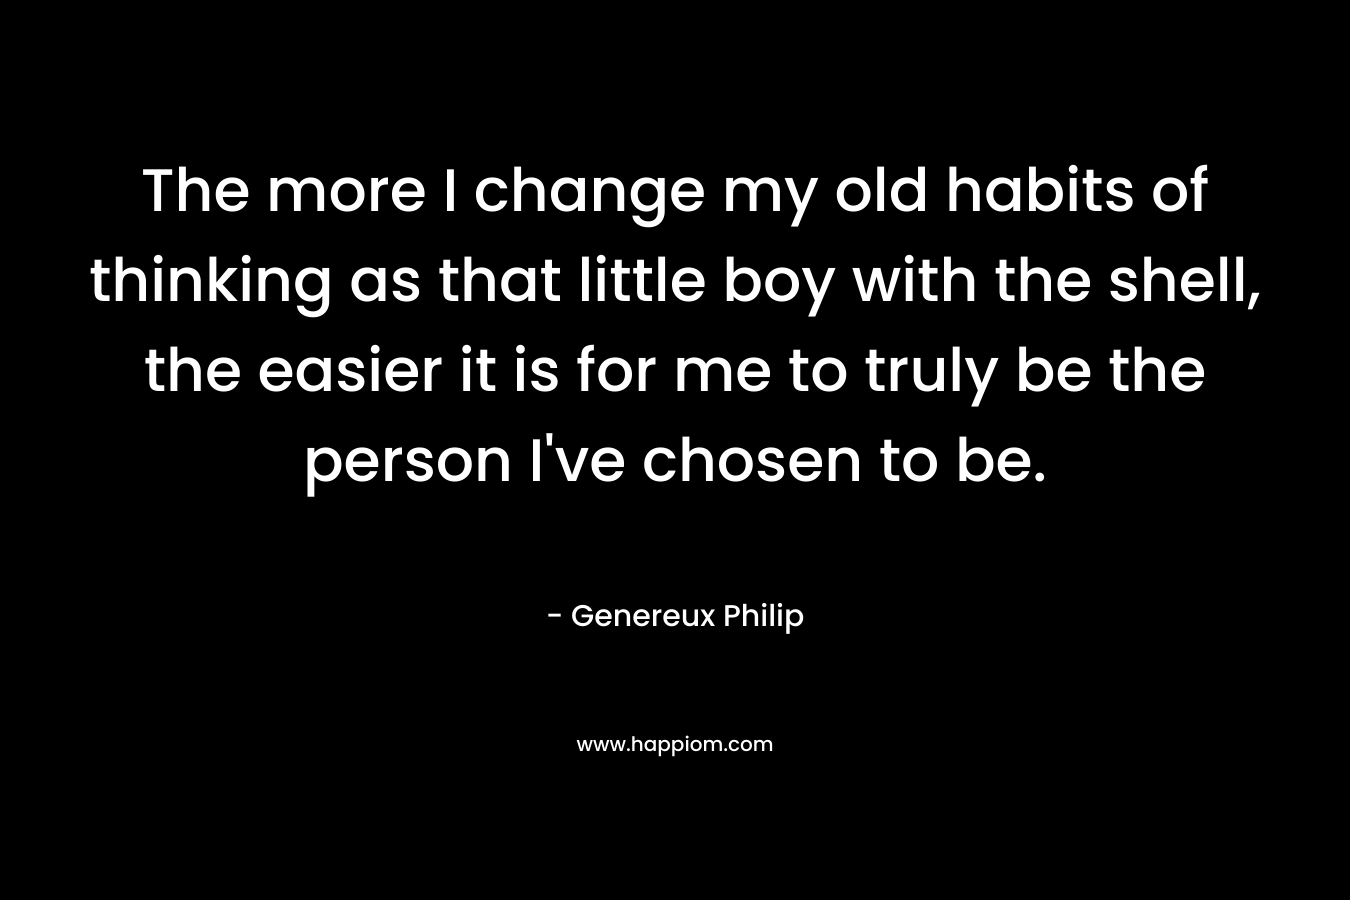 The more I change my old habits of thinking as that little boy with the shell, the easier it is for me to truly be the person I've chosen to be.